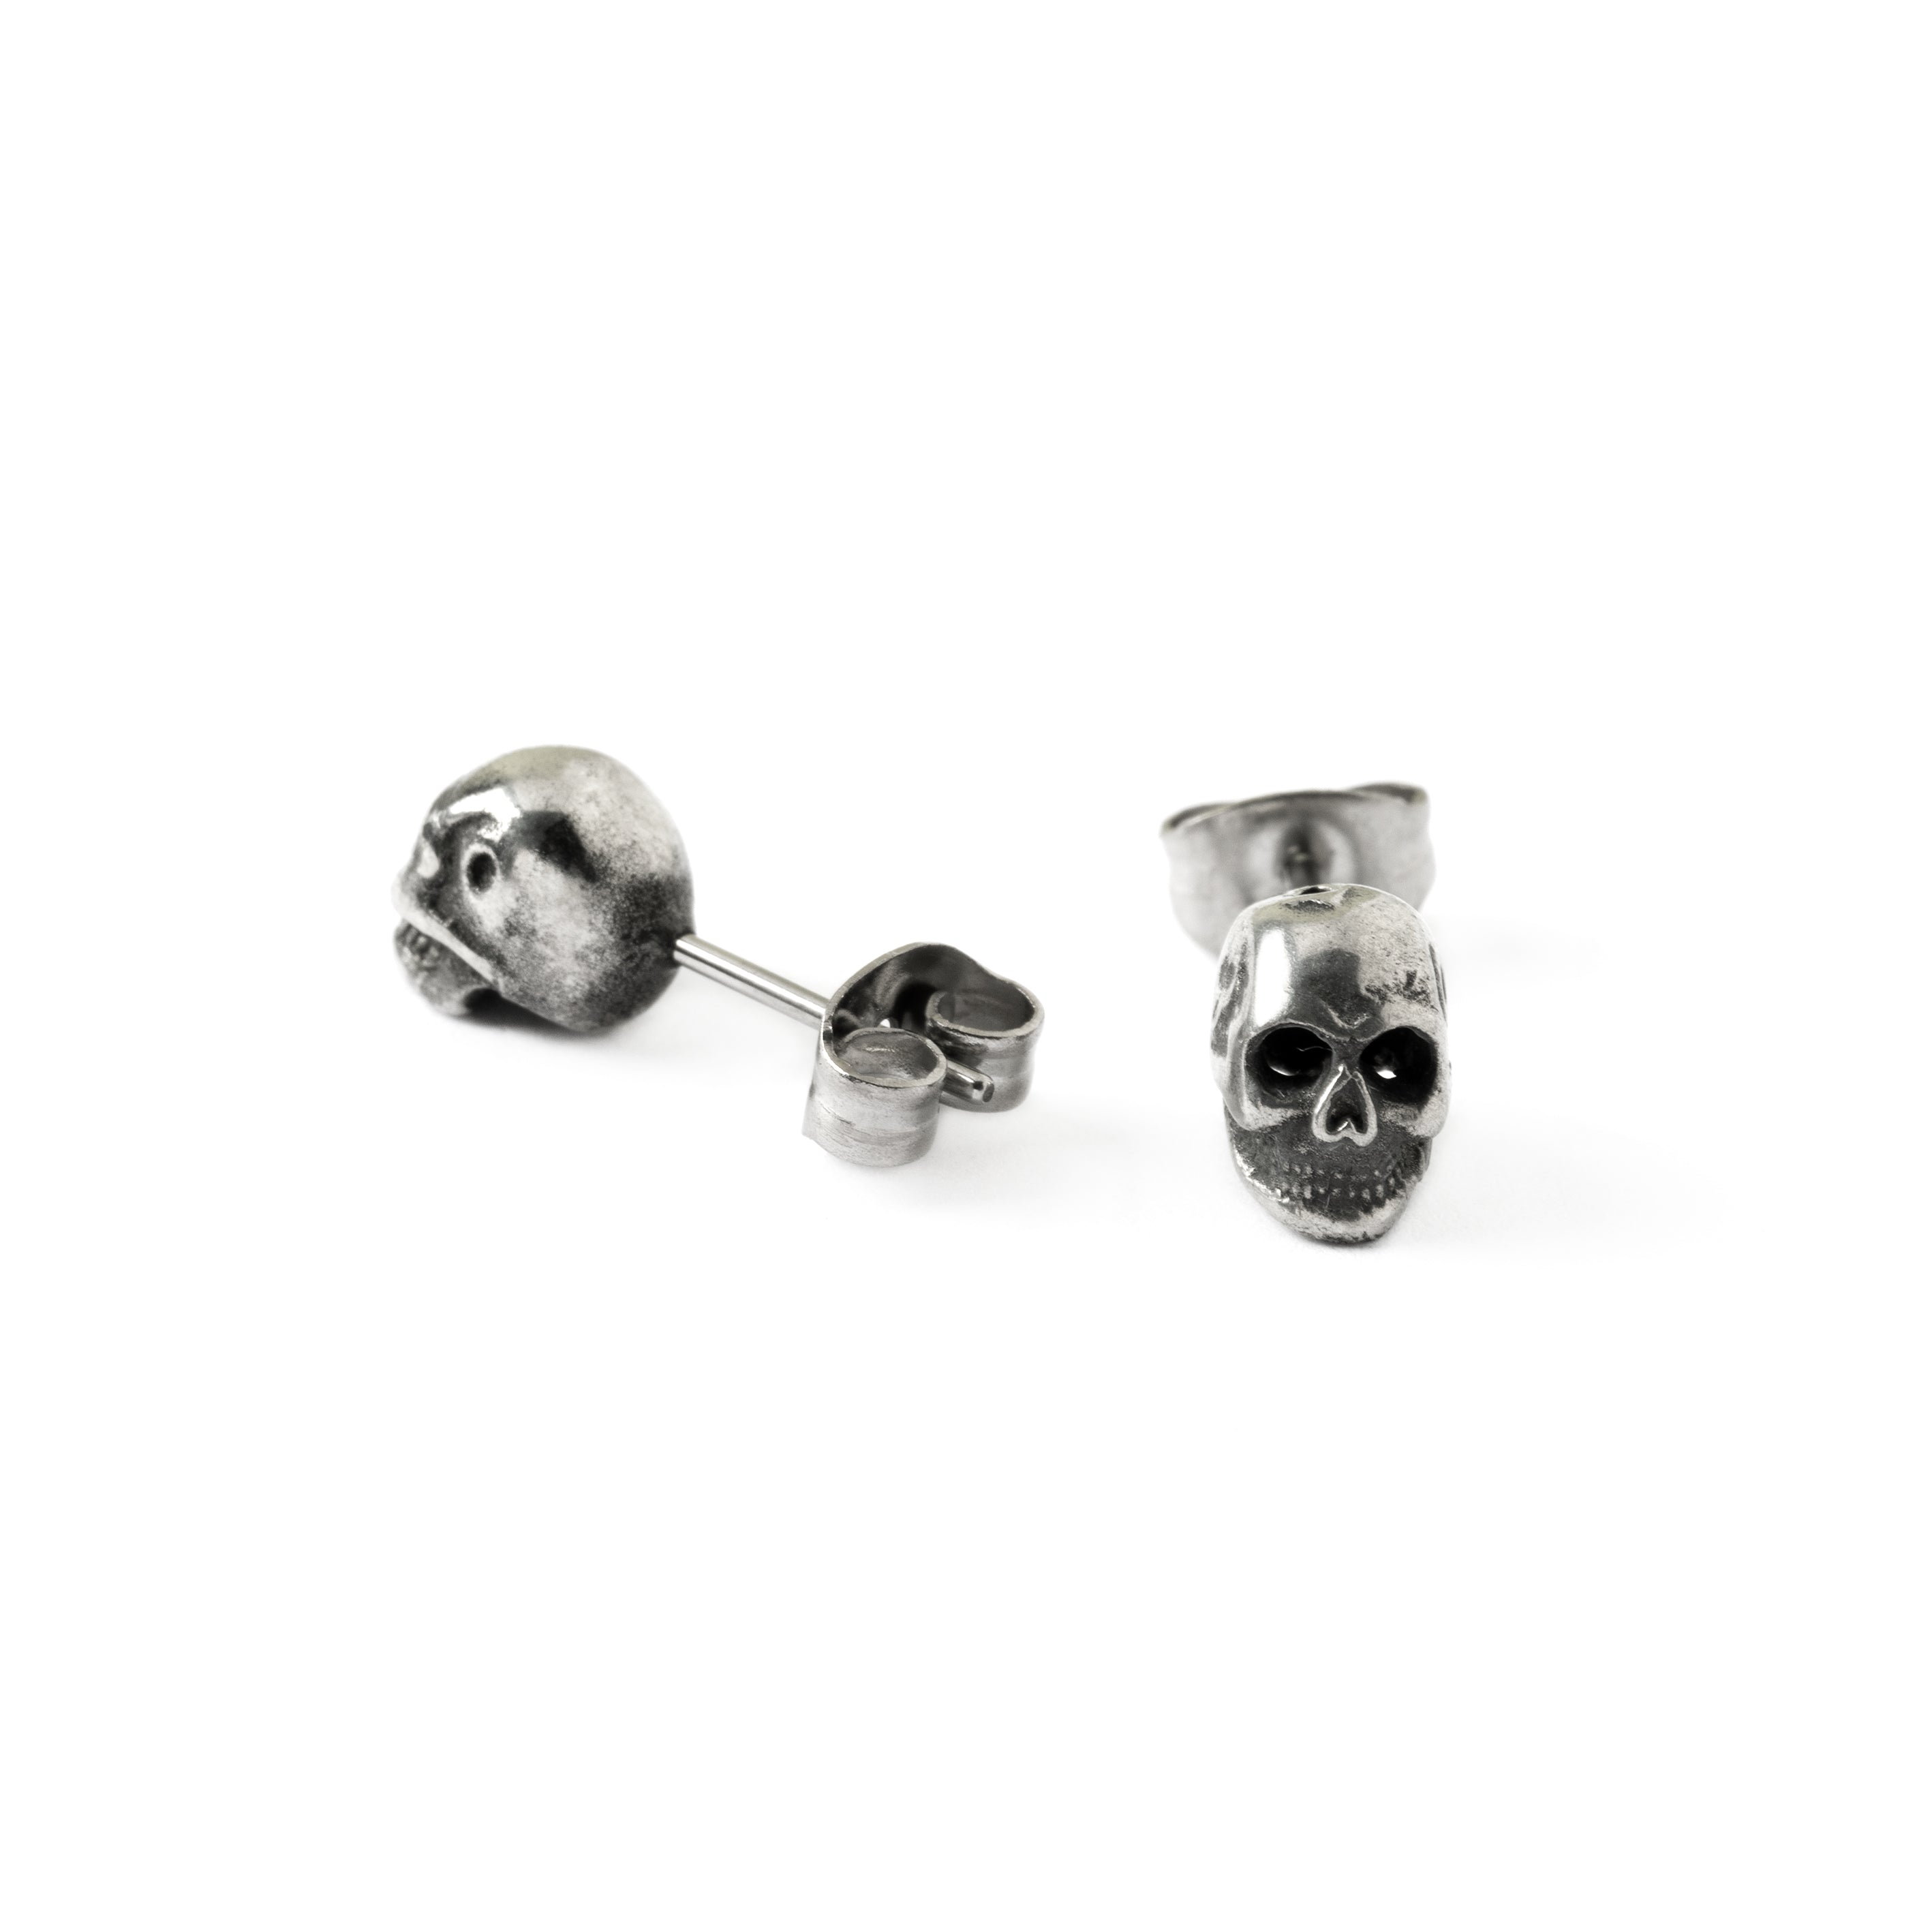 Skull stud earrings front and back side view